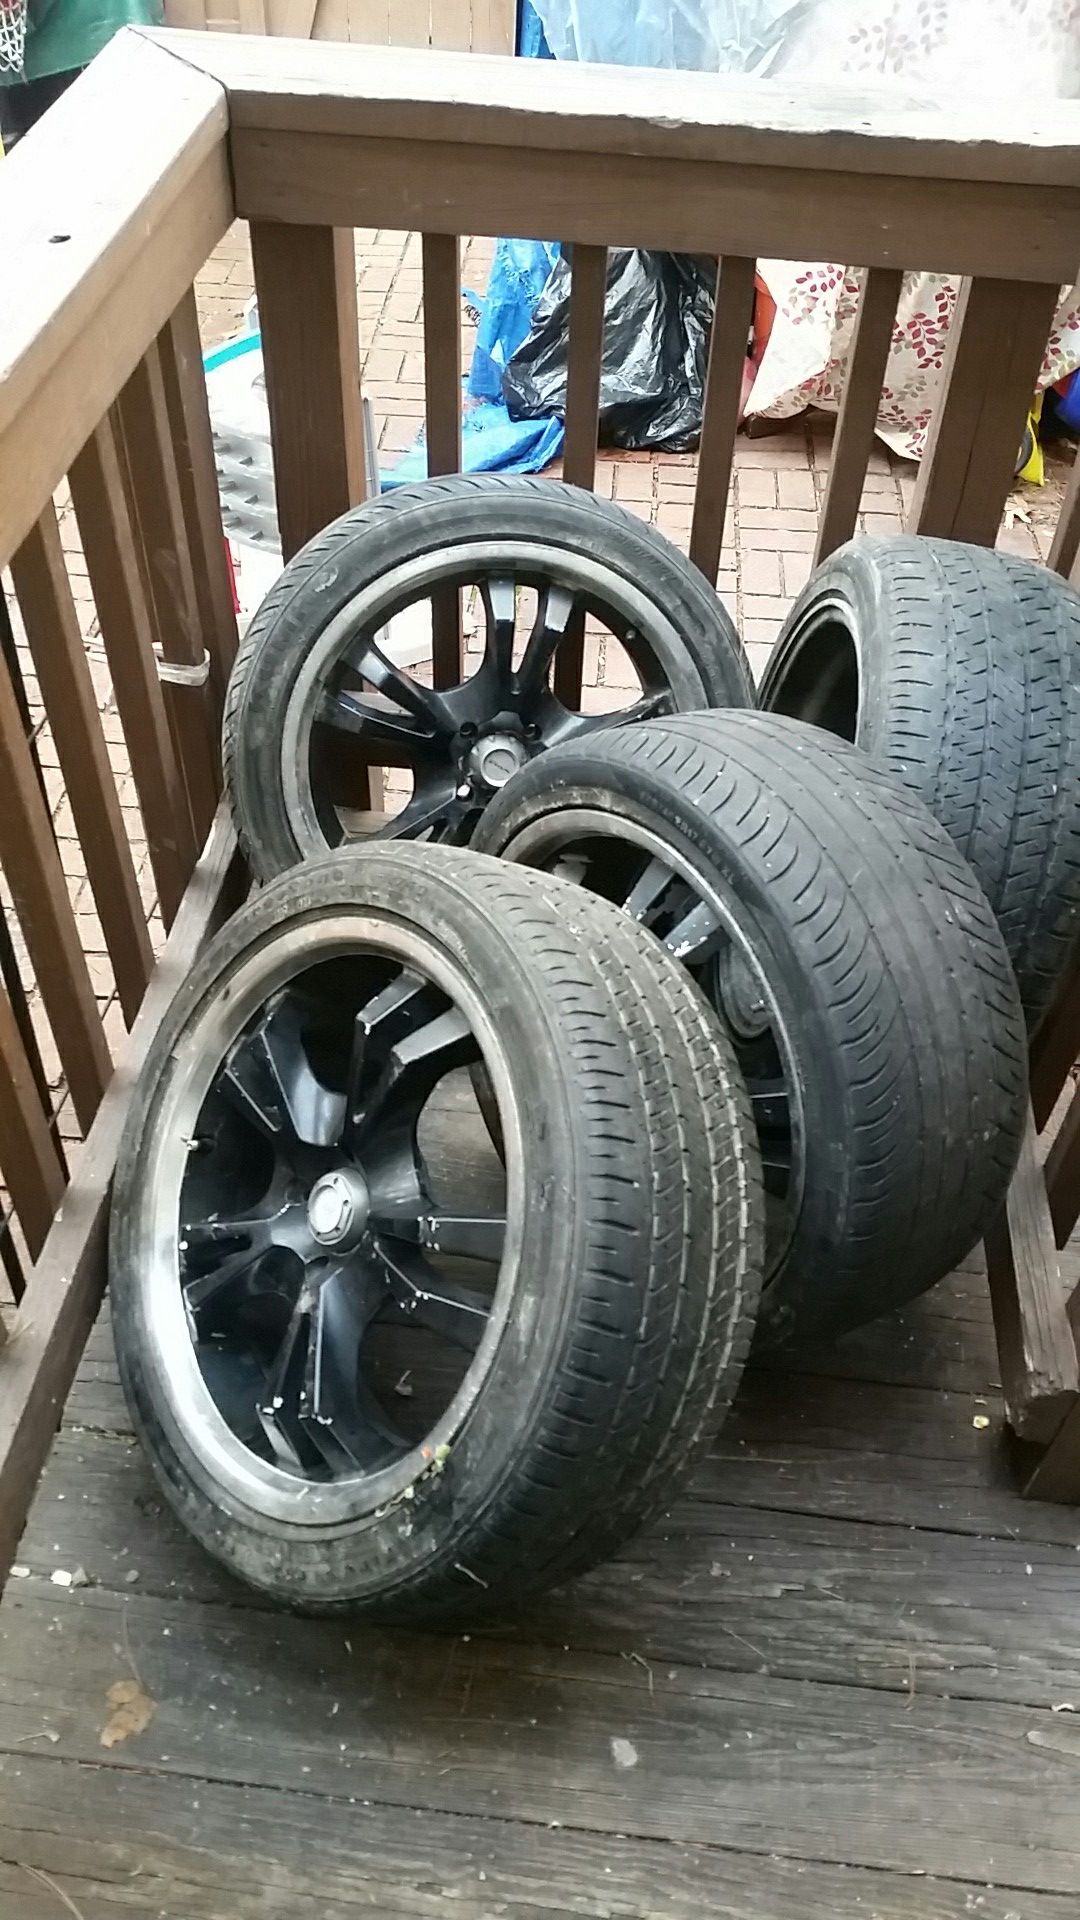 4 rims and tires for sale 250 obo.